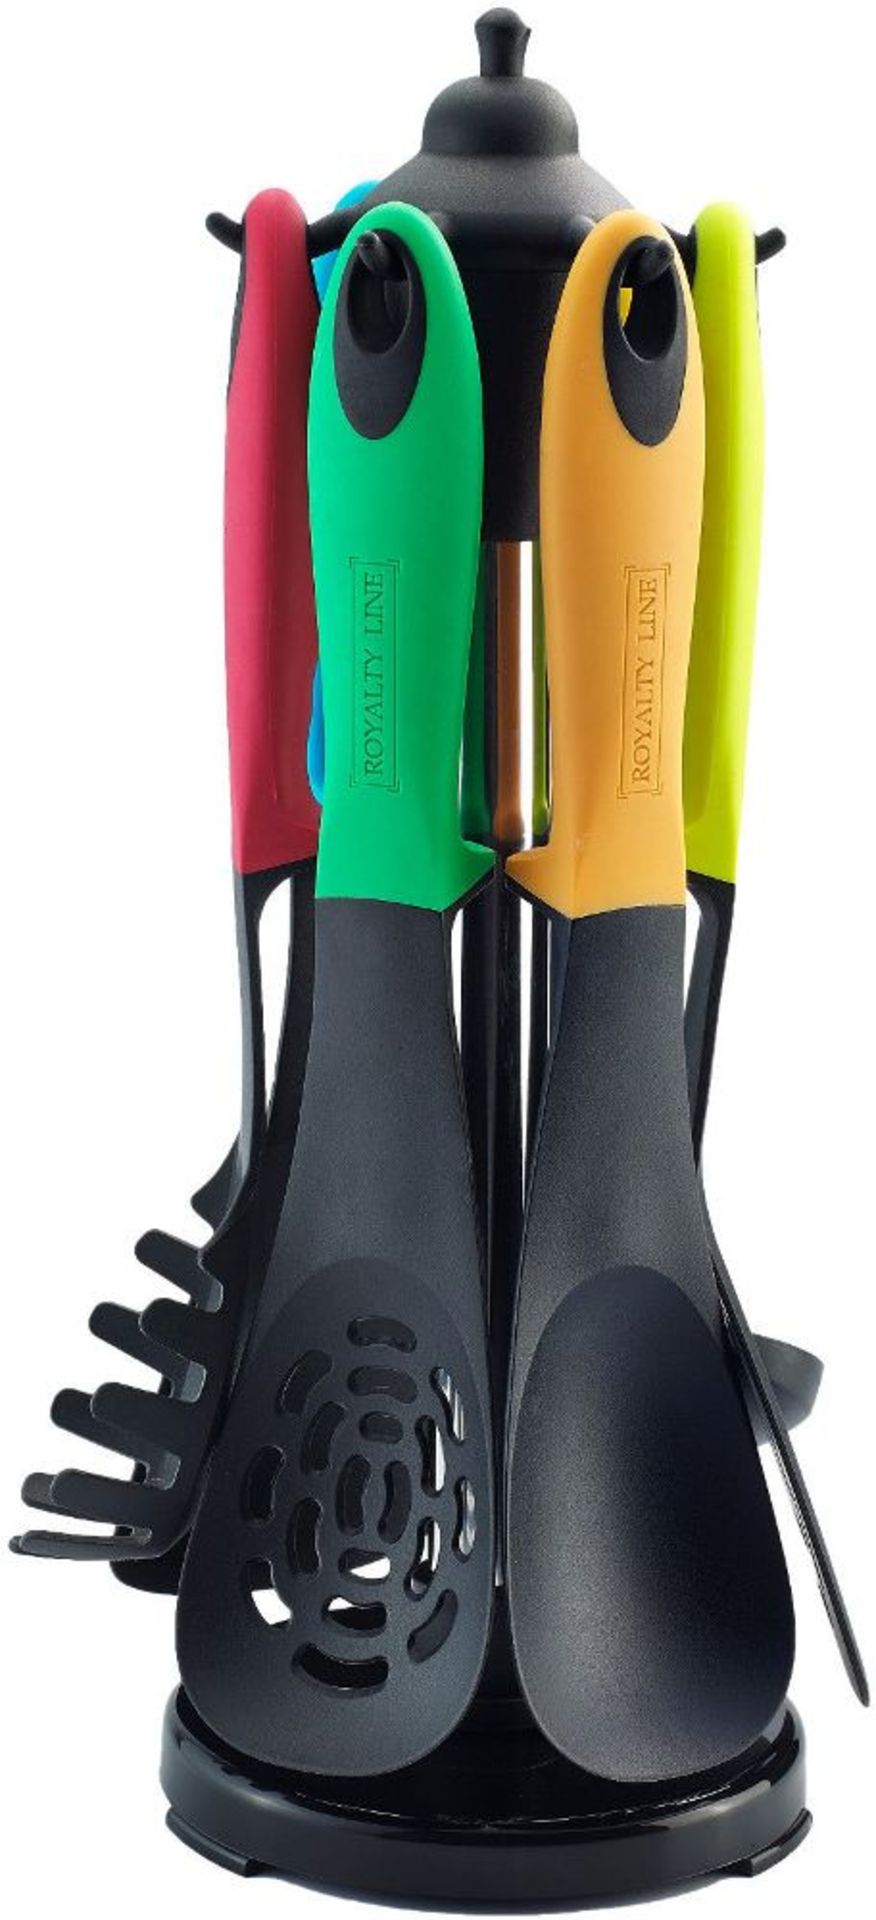 V Brand New 7 Piece Kitchen Utensil Set with Soft Touch Handles and Stand -Includes 27.4cm Soup